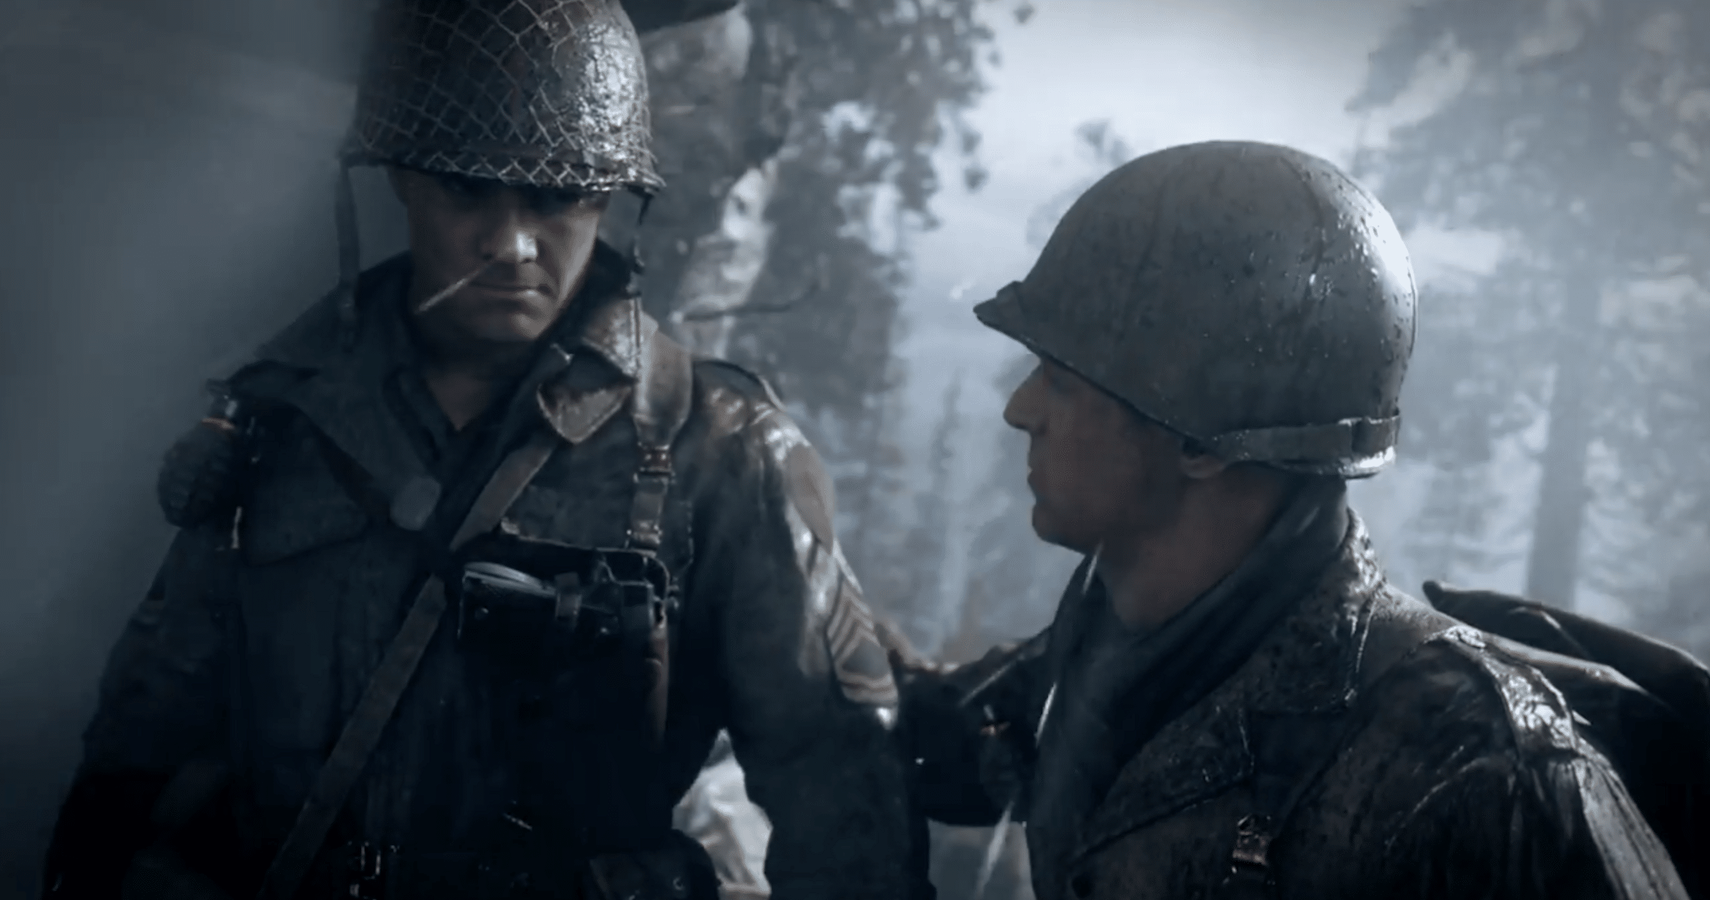 Topic · Call of duty wwii ·